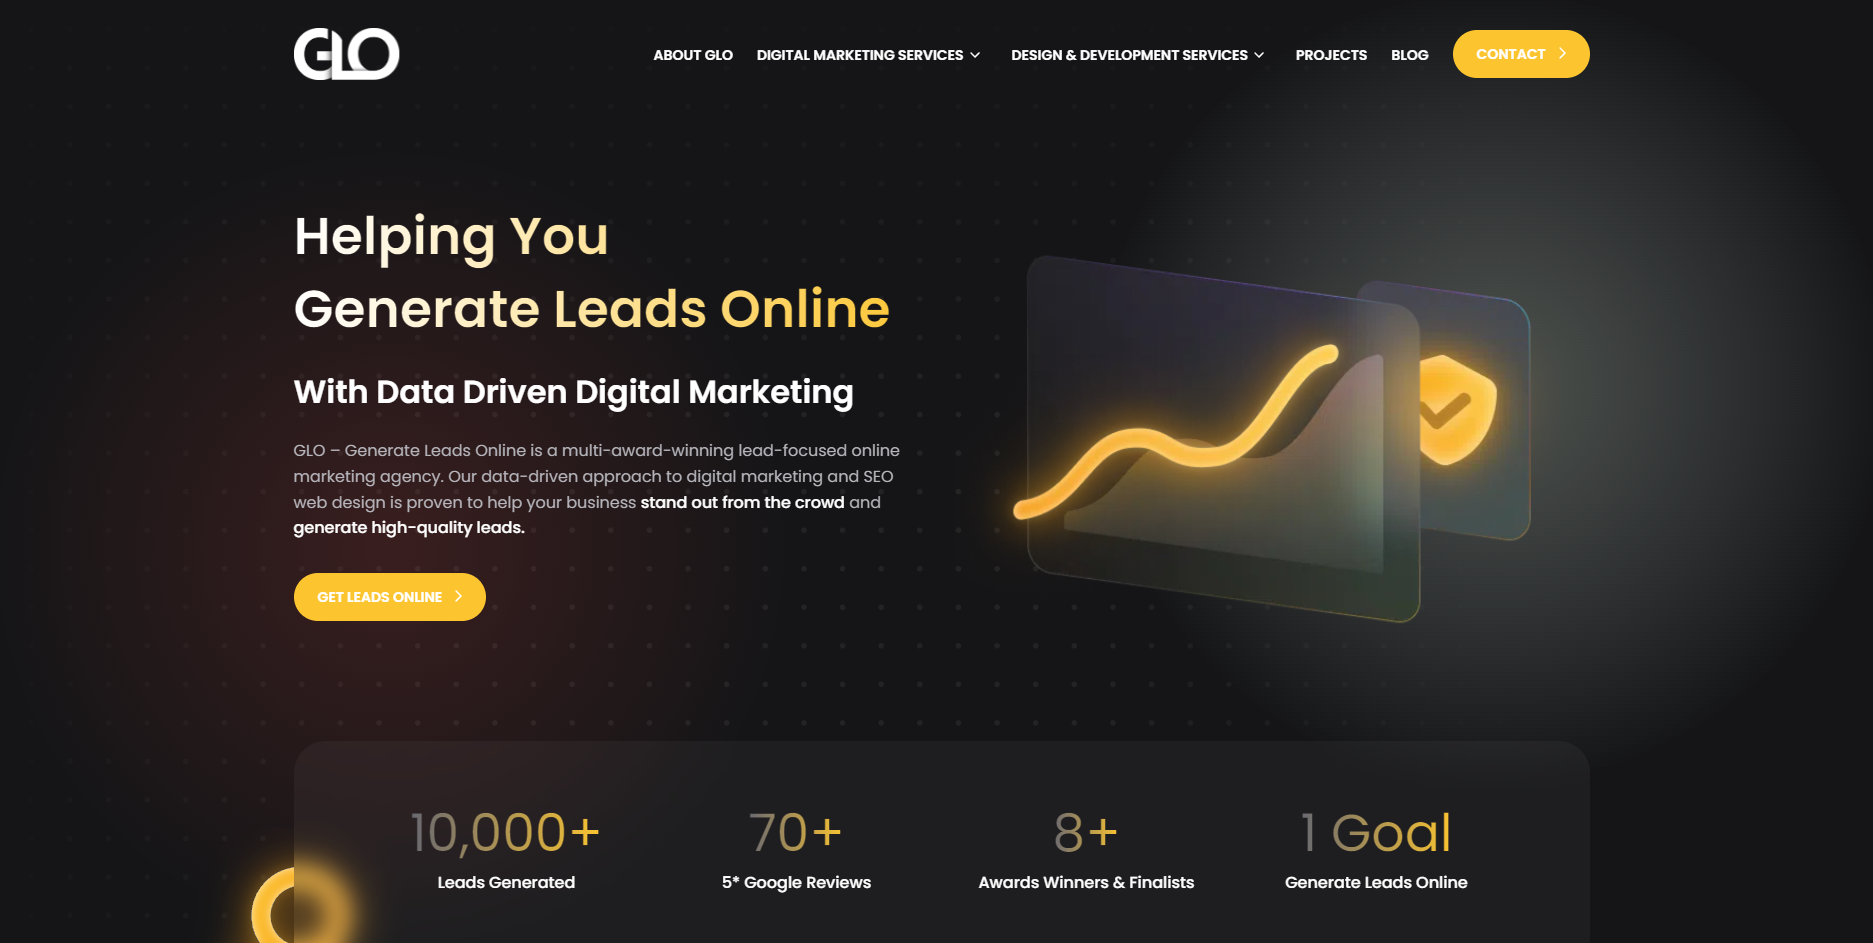 GLO website - Helping you generate leads online with data driven digital marketing